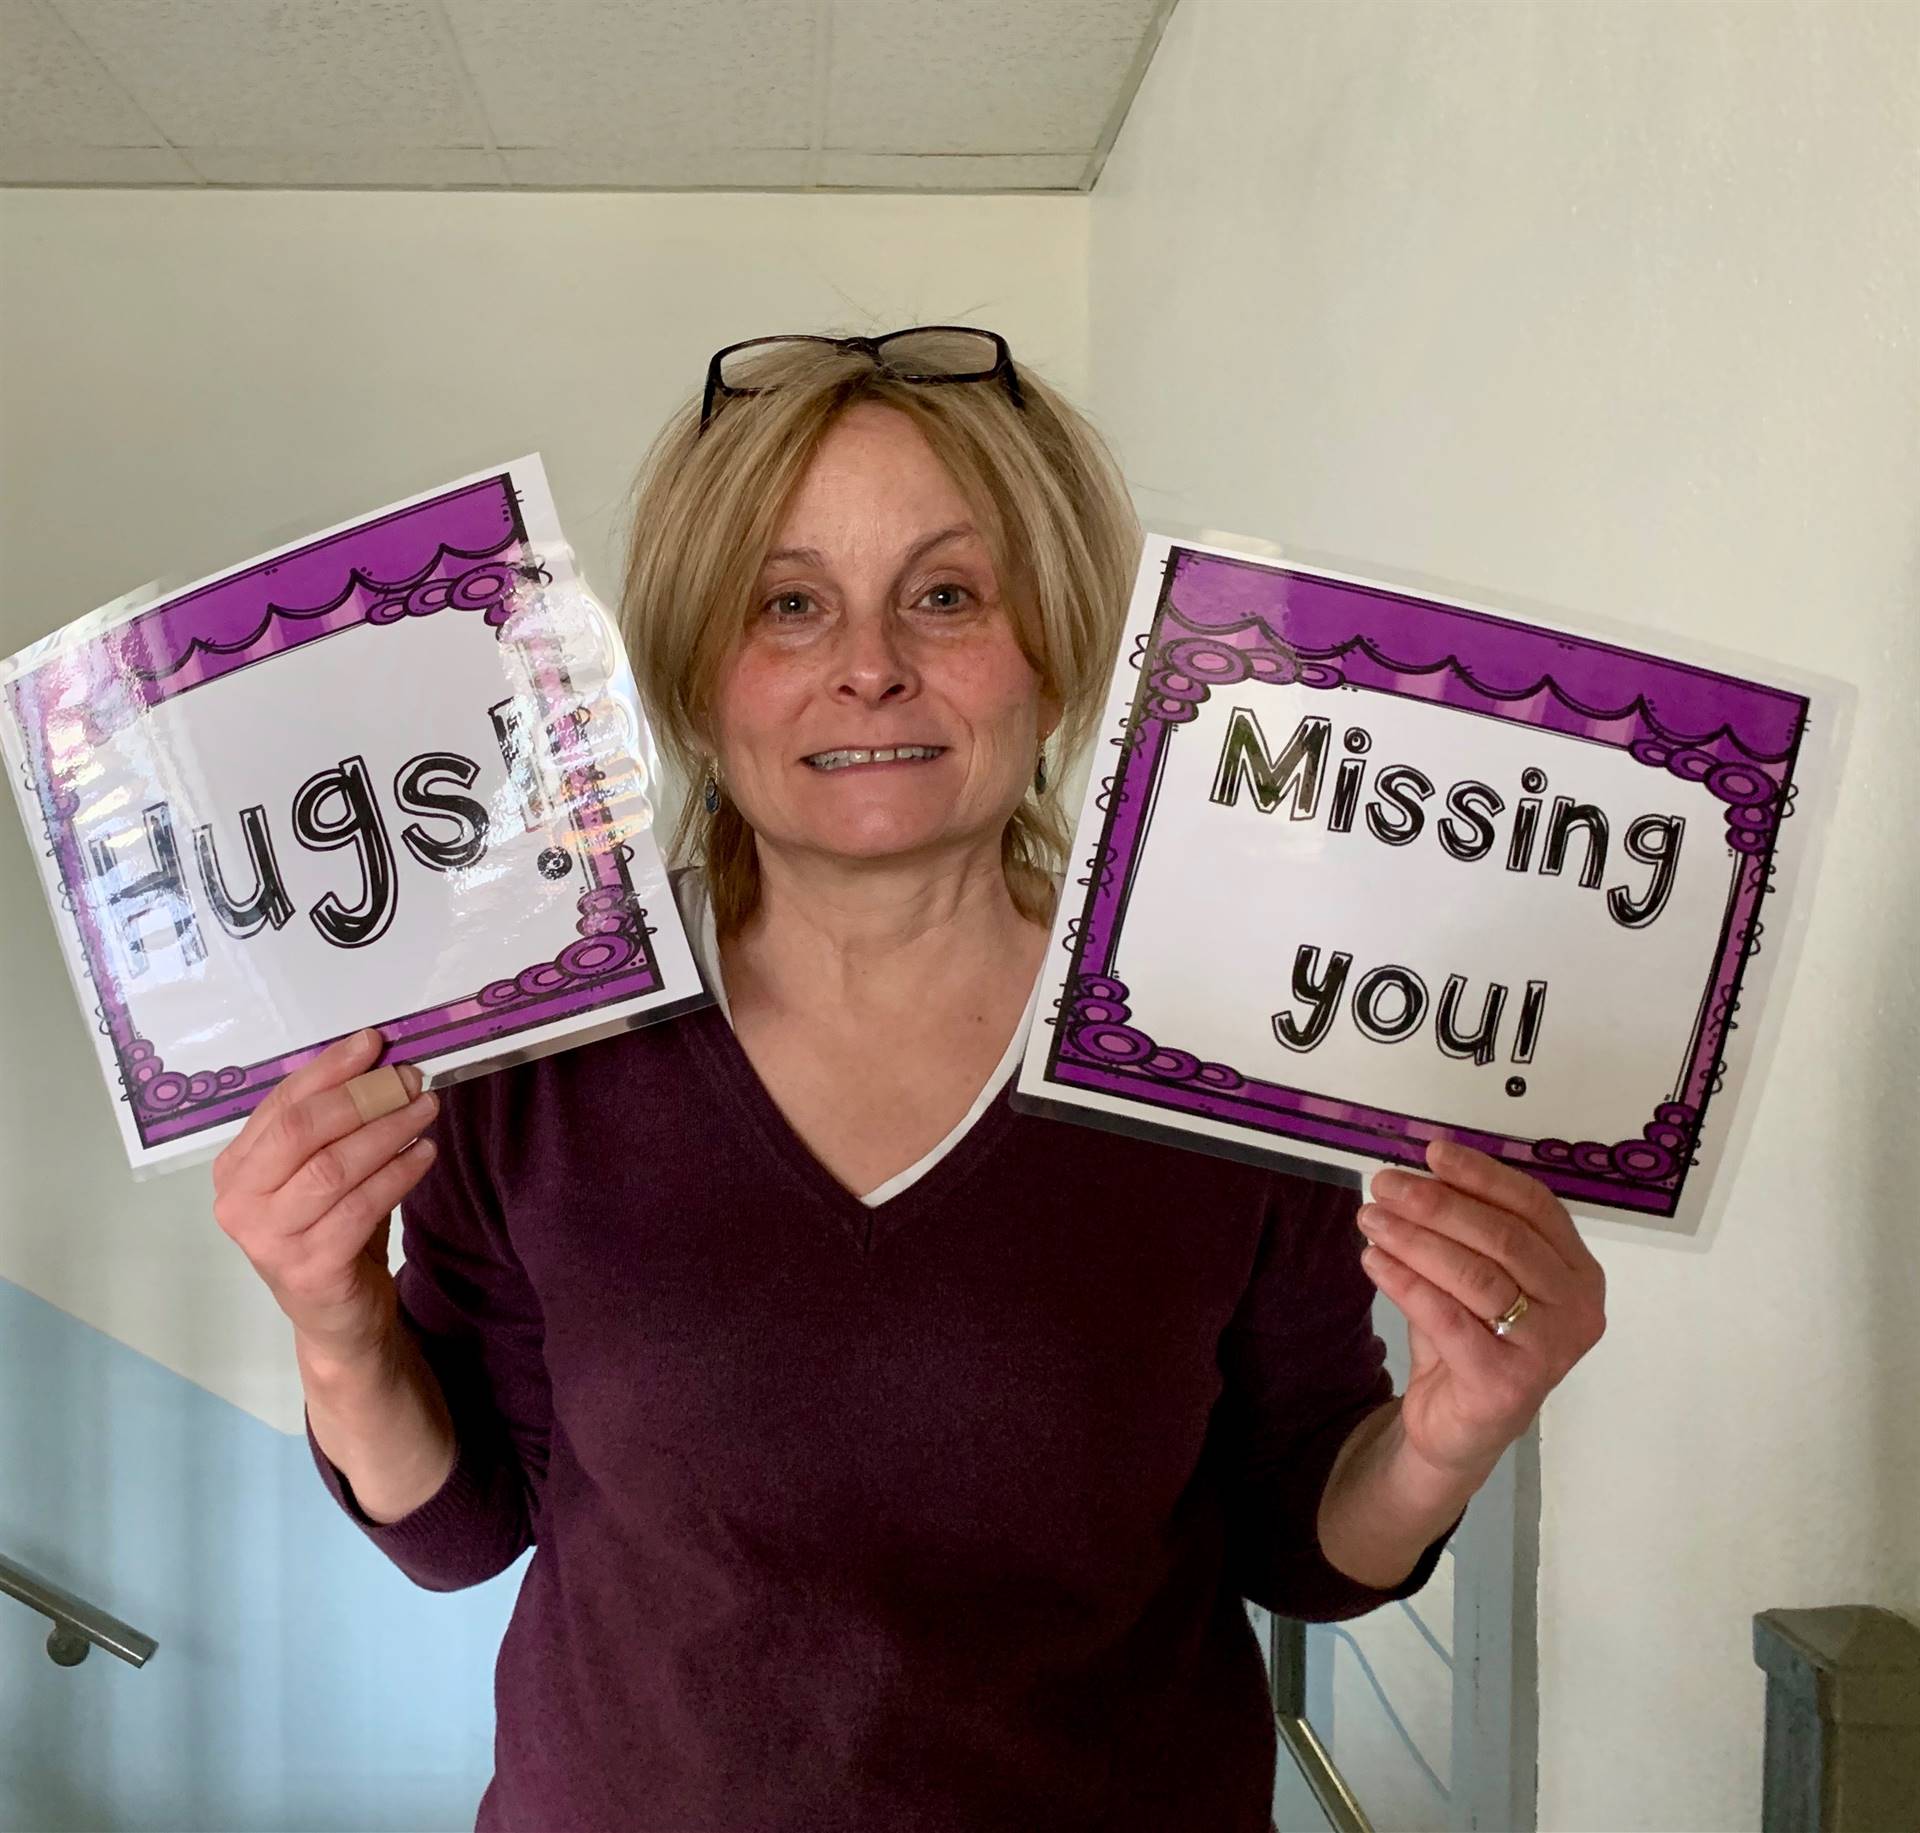 A staff member with signs saying Hugs and Missing you